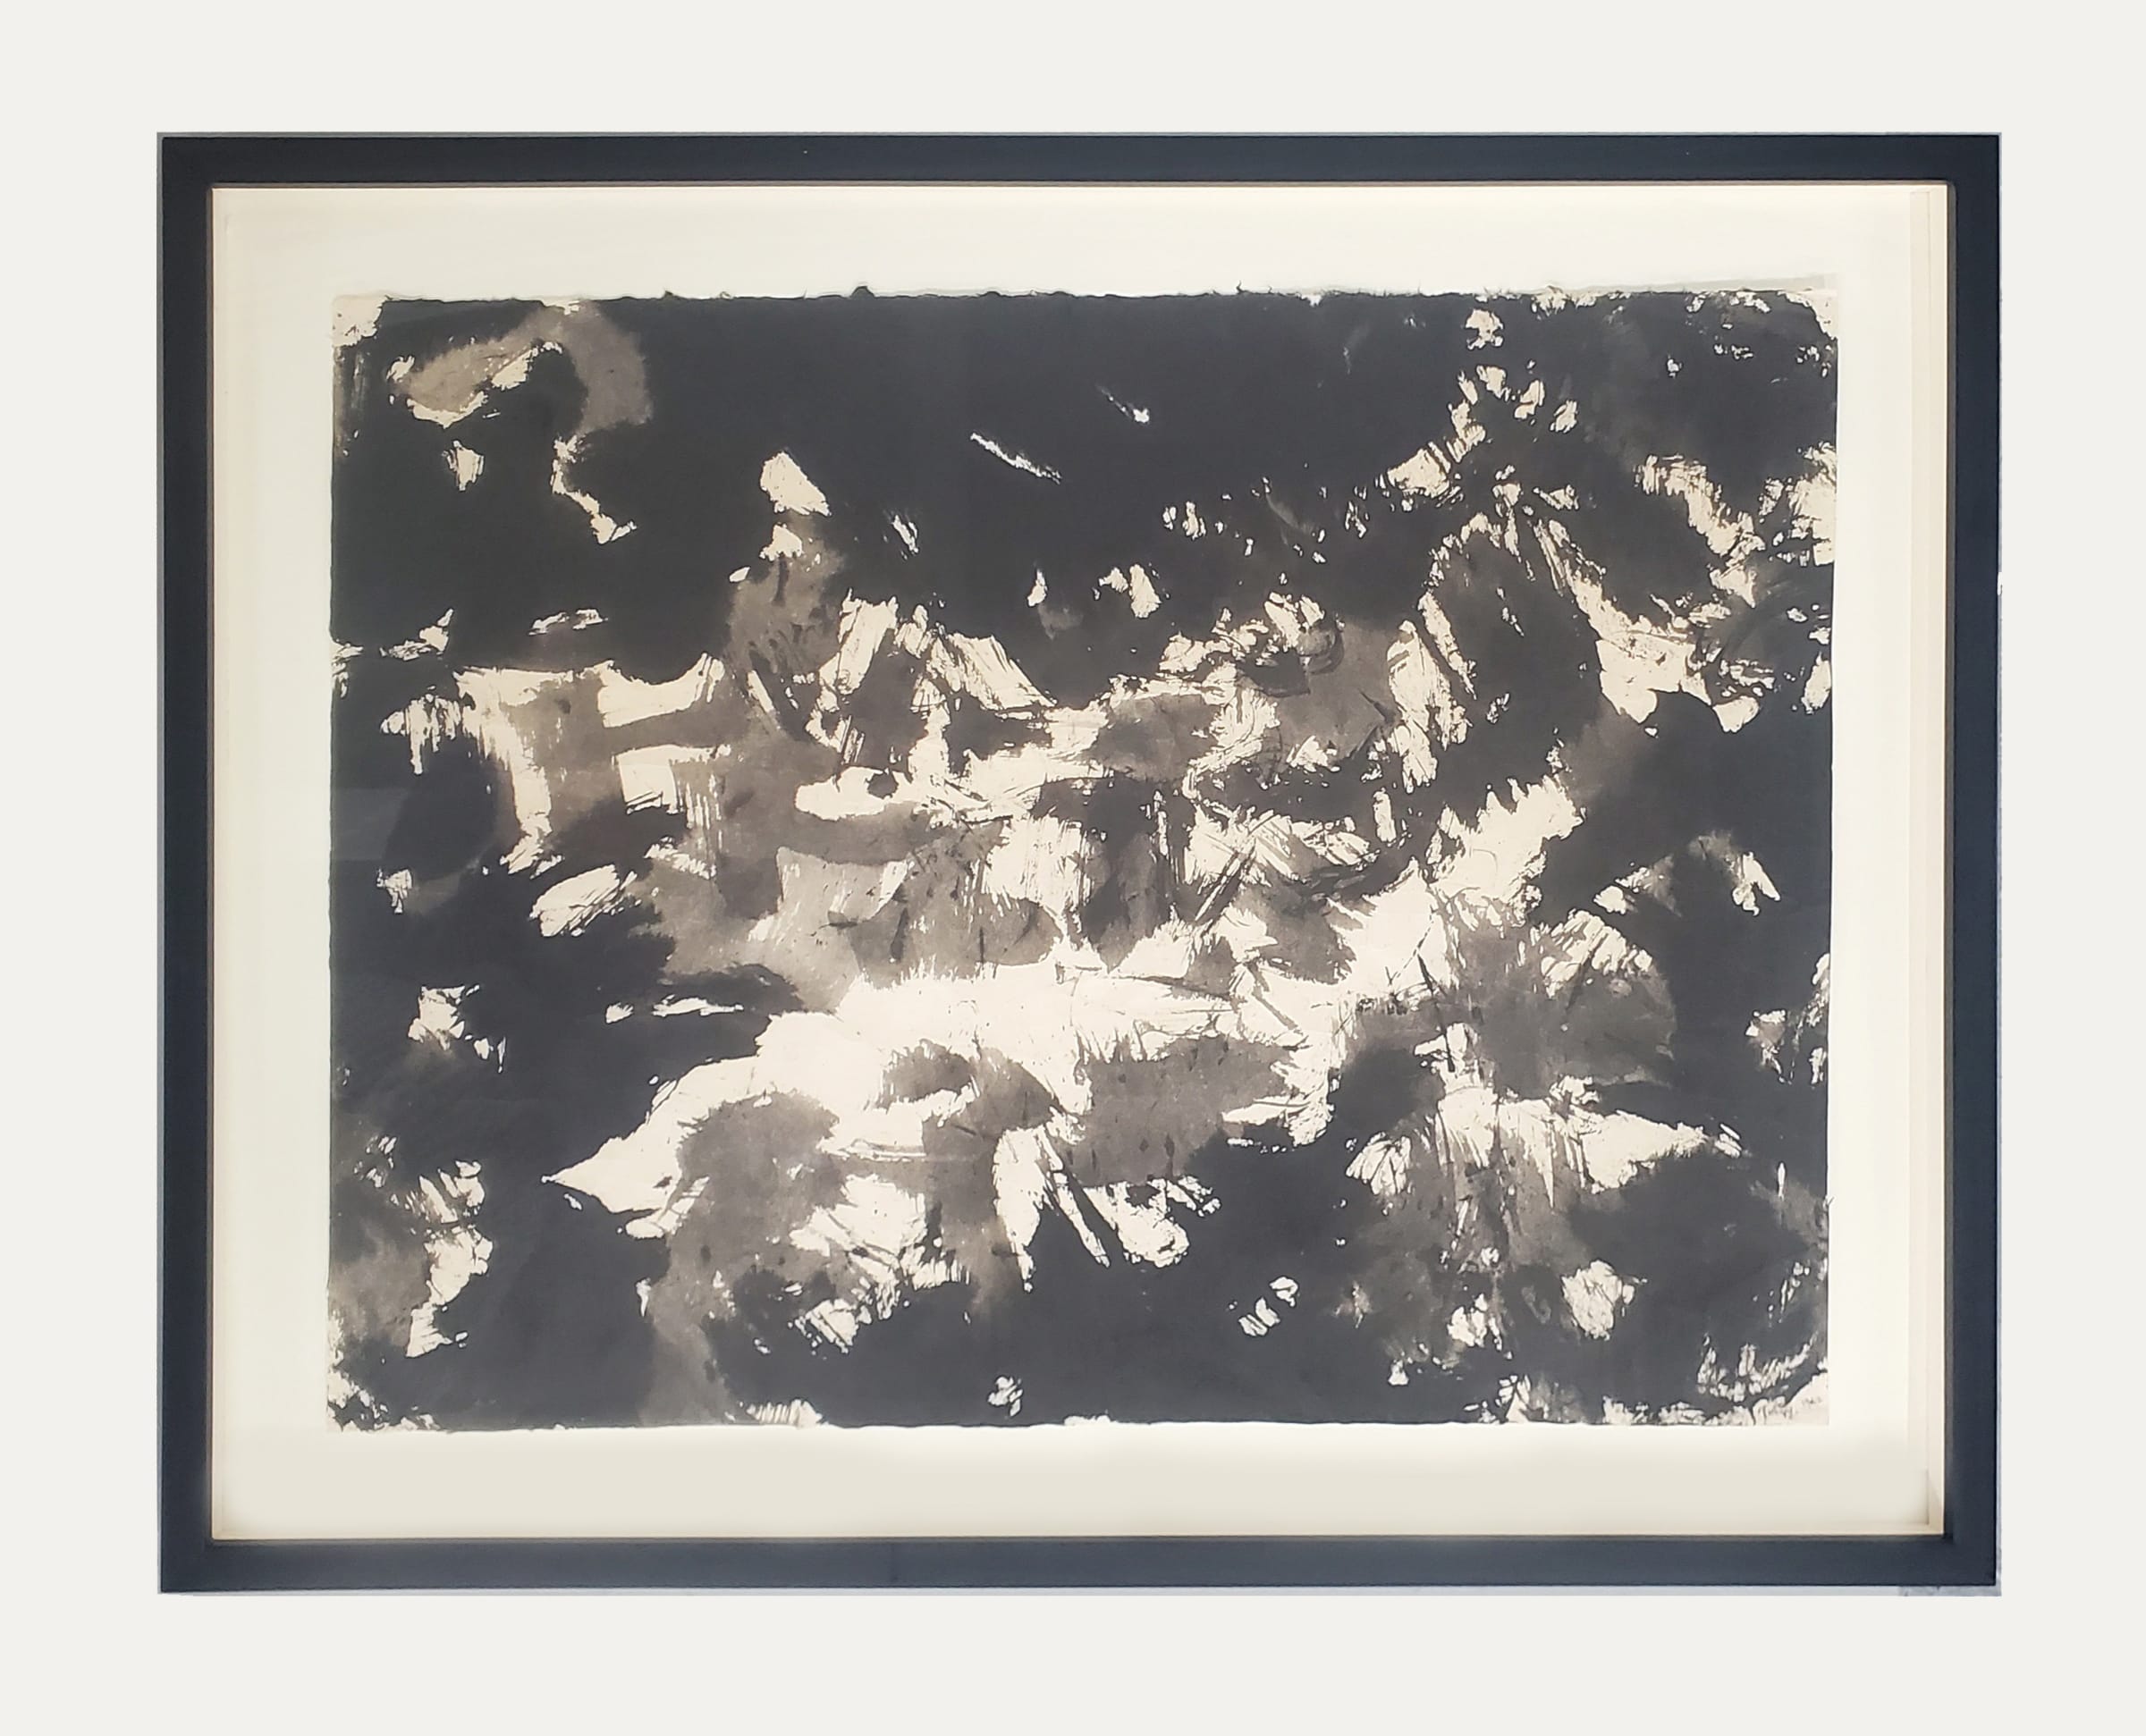 Mark Tobey、Untitled Composition、希少画集画